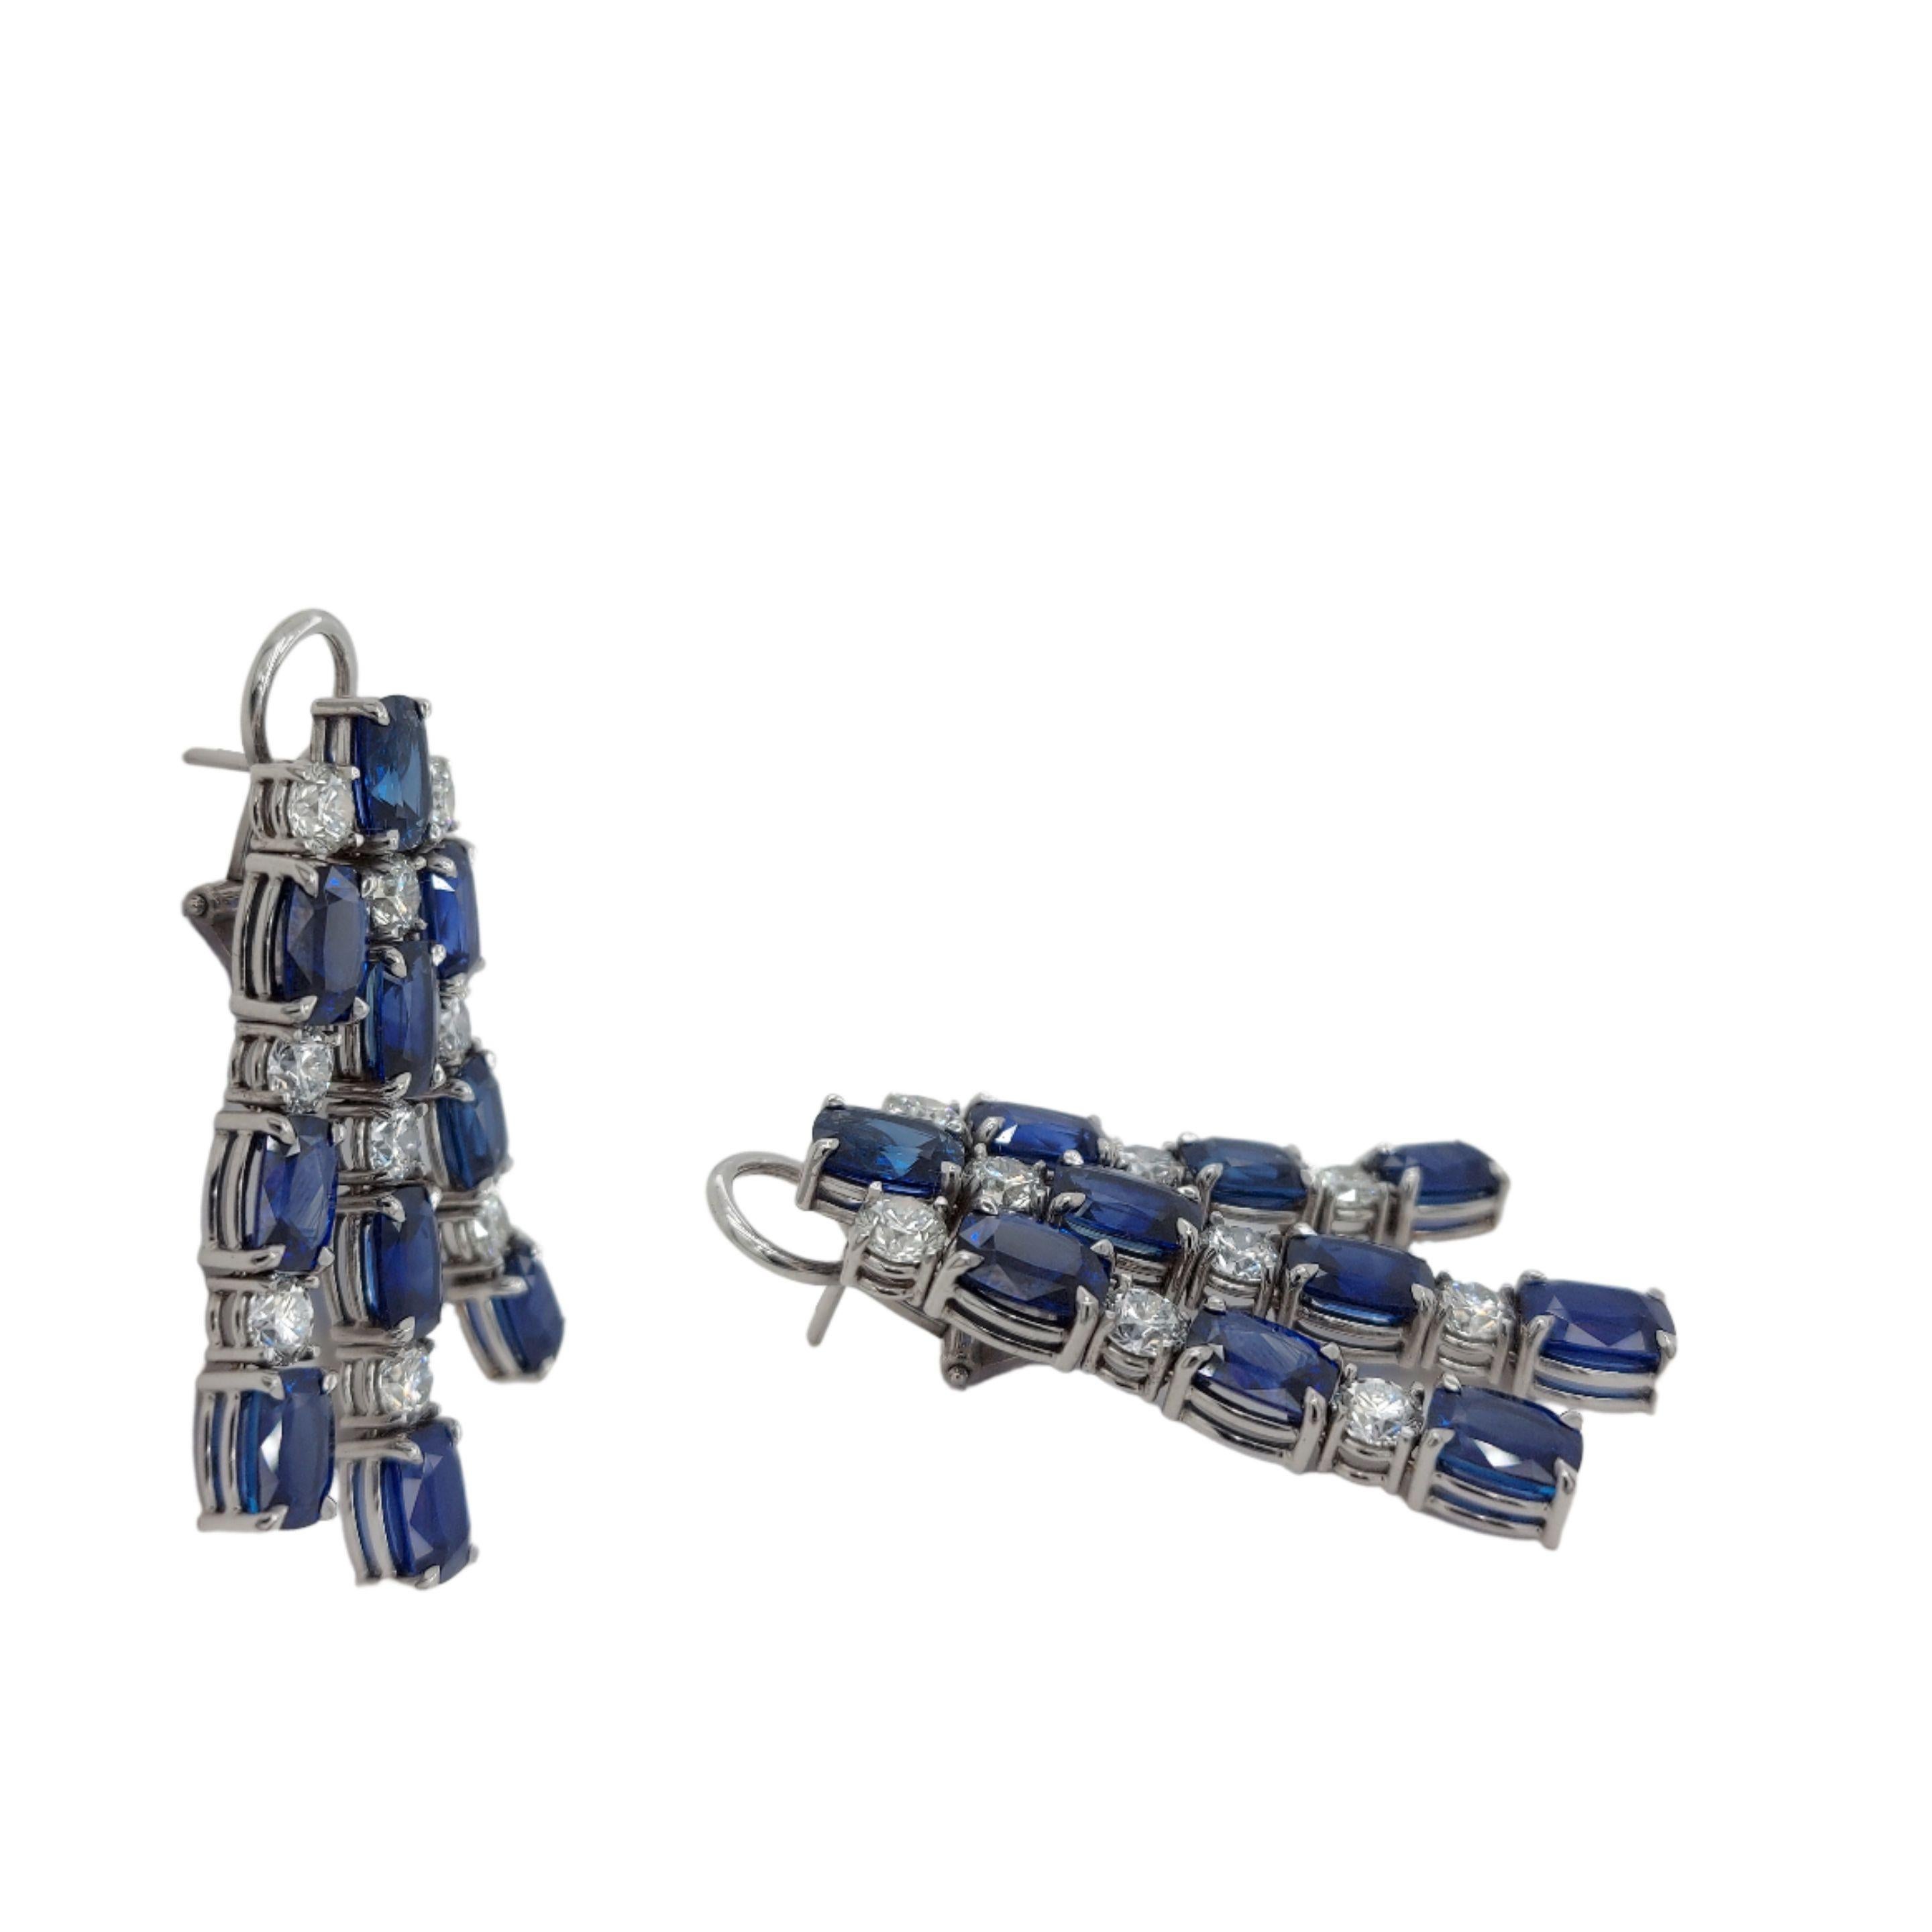 18kt White Gold Earrings with 21.42ct Sapphires, 5.09ct Diamonds, CGL Certified In New Condition For Sale In Antwerp, BE